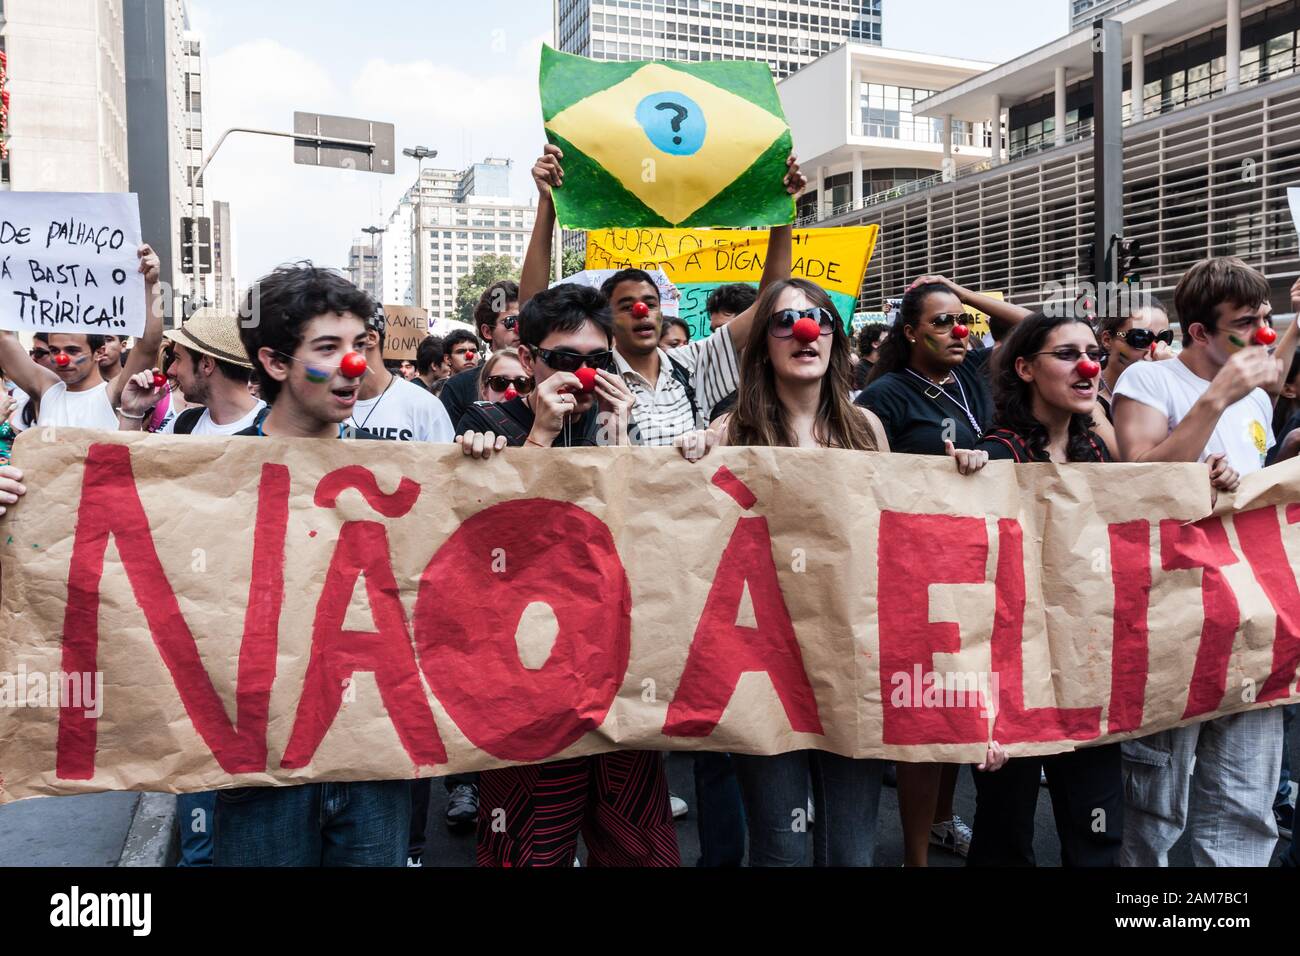 Sao Paulo, Brazil. 15th November, 2010. High school and college students hold banners and signs during a demonstration against the 'Exame Nacional do Ensino Medio (Enem)' (National High School Exam) along the financial district of Avenida Paulista (Paulista Avenue) in Sao Paulo, Brazil. Stock Photo